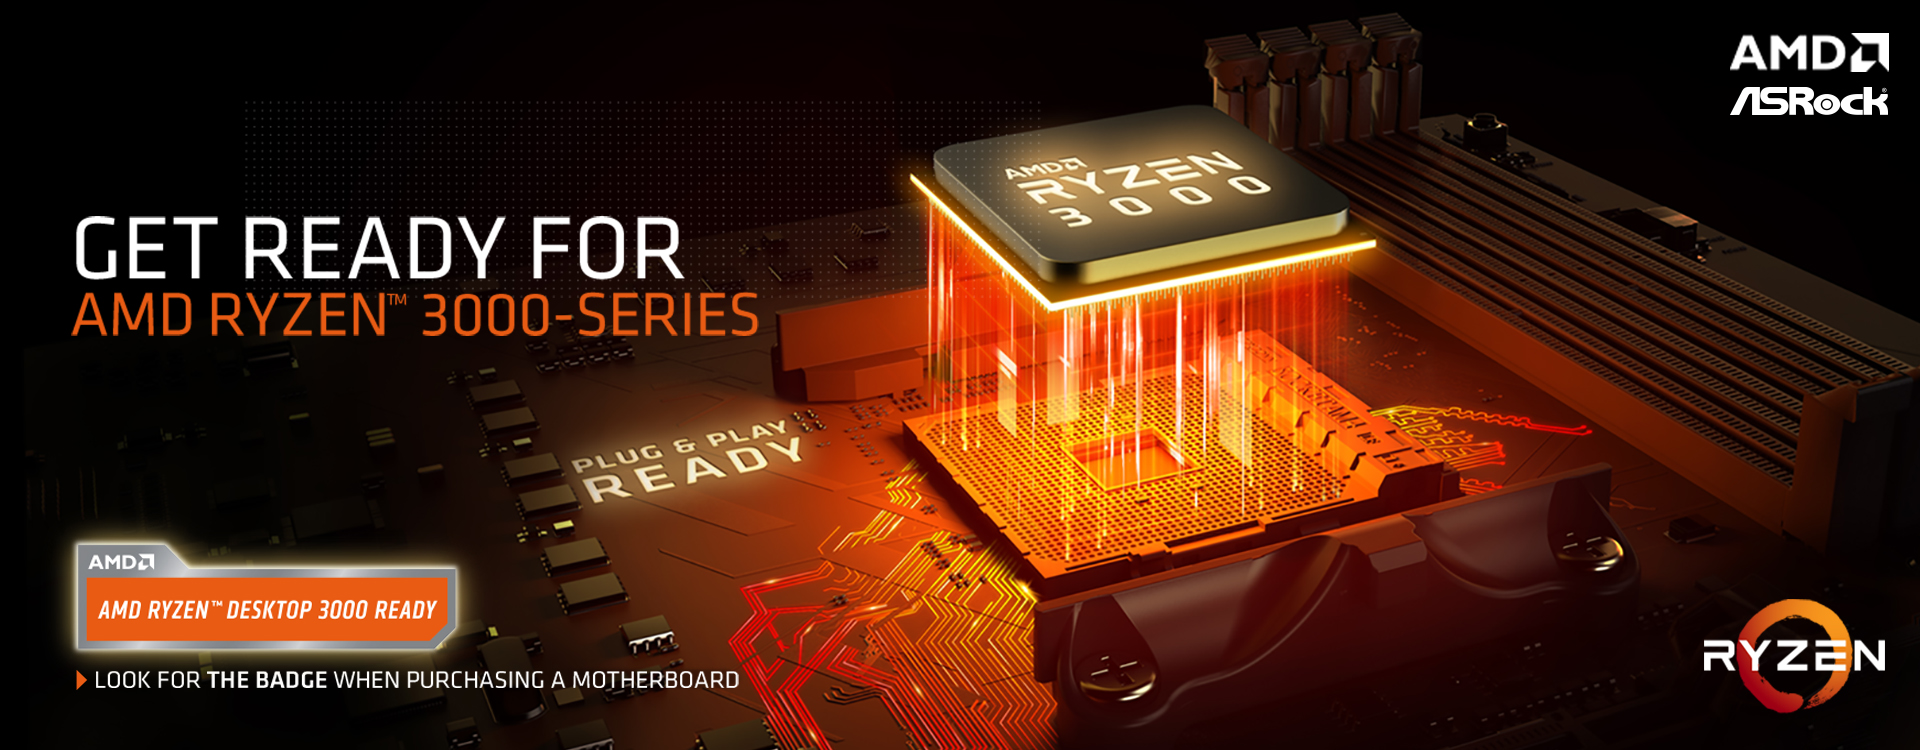 AMD Ryzen 3000 Banner Showing the CPU Rising from a Motherboard with Stylized Lighting Graphics. There Is Text That Reads: GET READY FOR AMD RYZEN 3000-SERIES, PLUG & PLAY READY